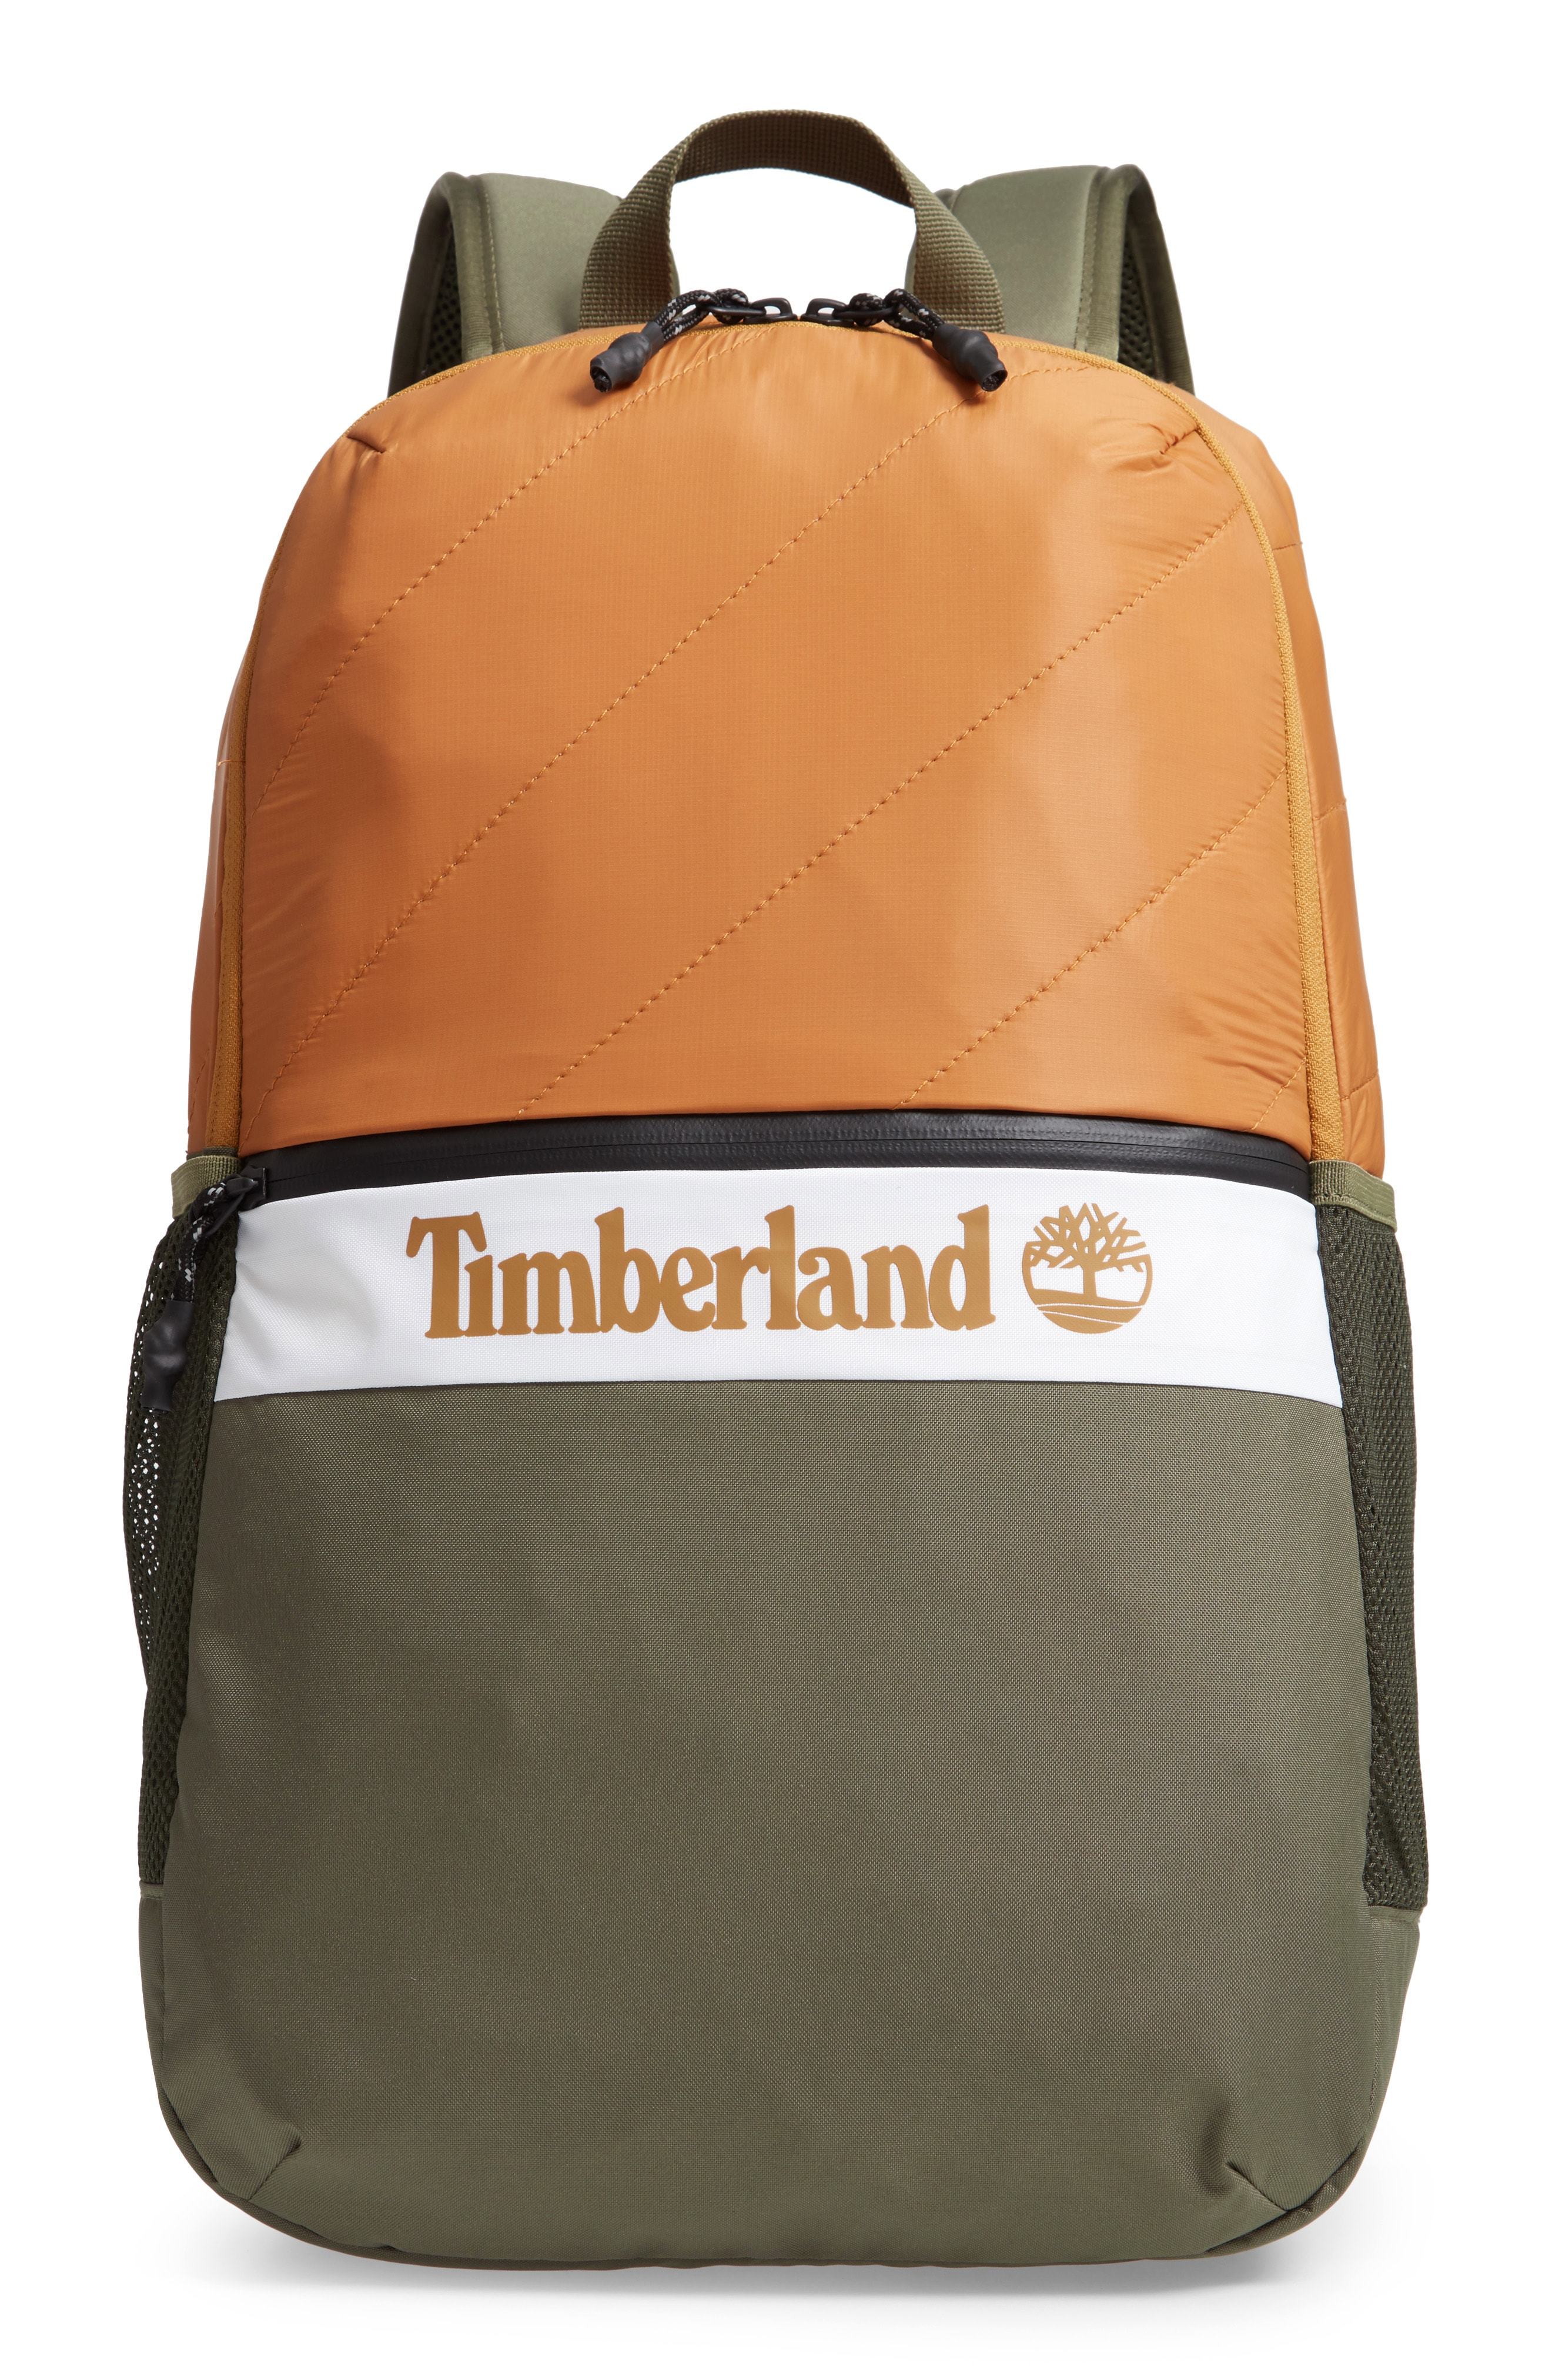 Timberland Wheeled Duffle 30 Inch Lightweight Large Rolling Luggage Bag  Suitcase in Black | Lyst